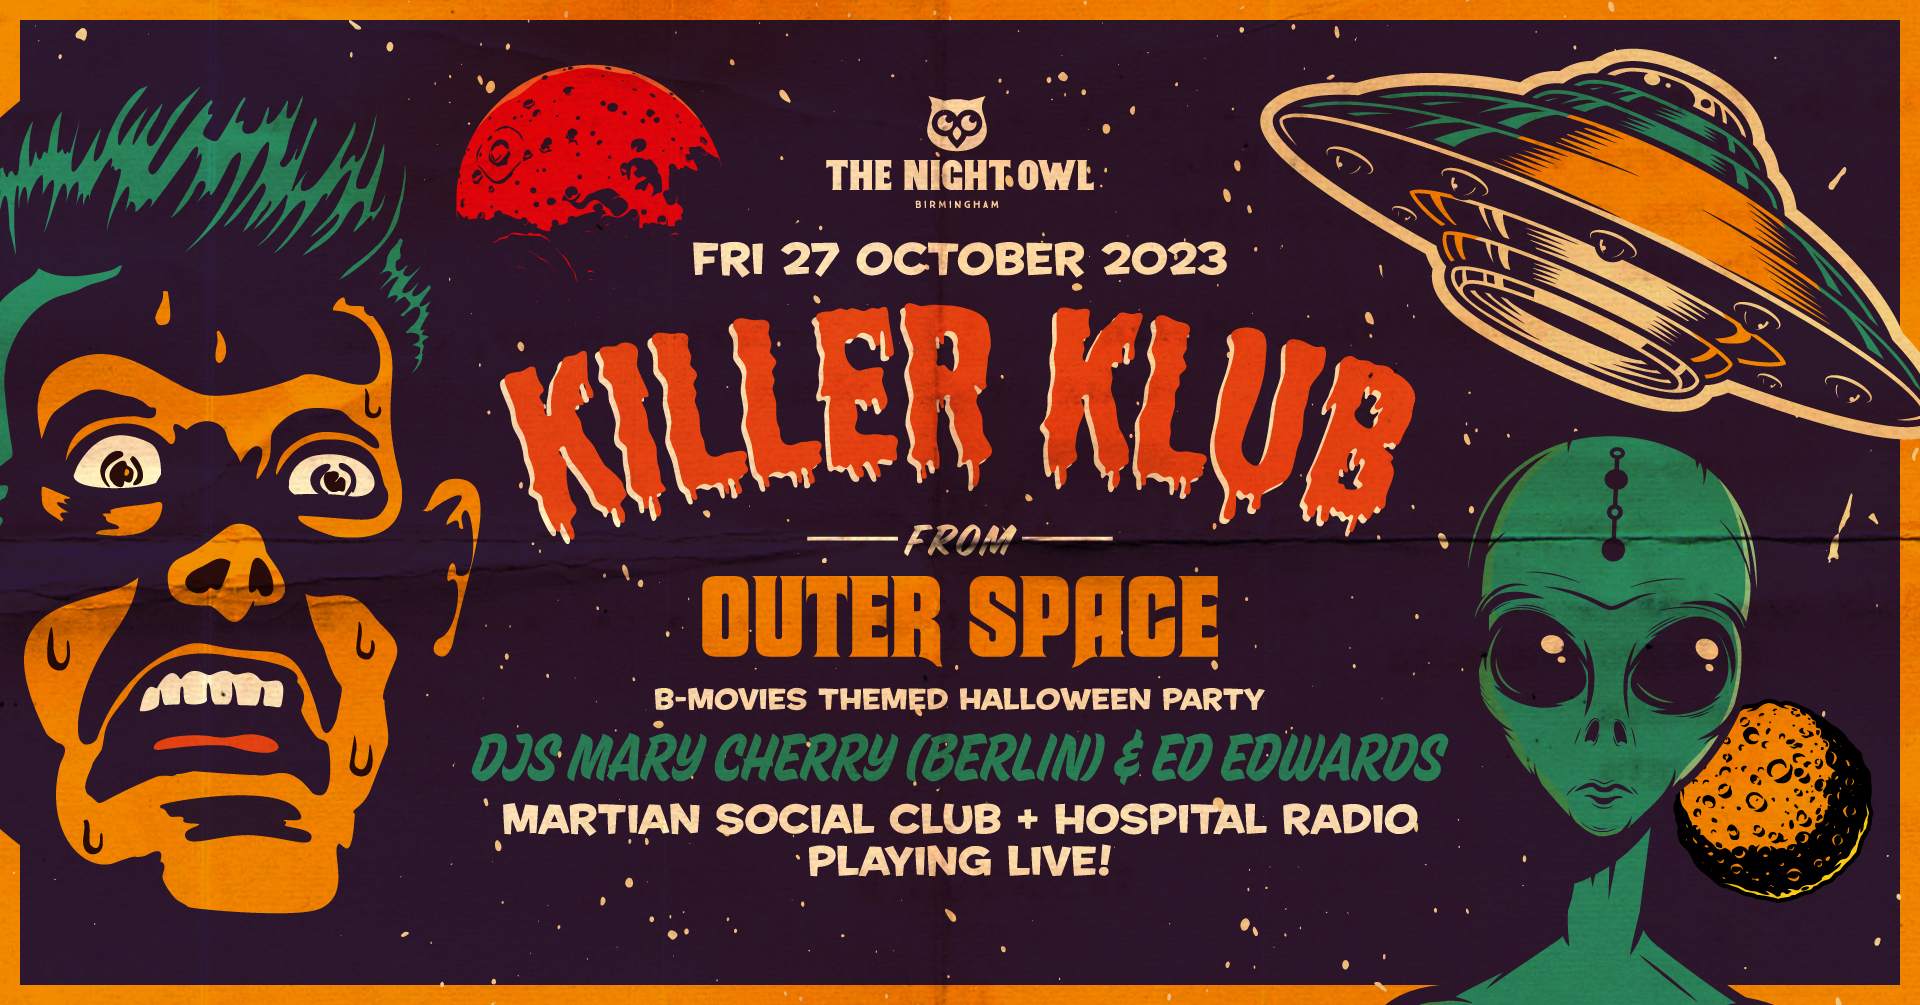 Killer Klub from Outer Space = A B Movies Themed Halloween Party - Página frontal